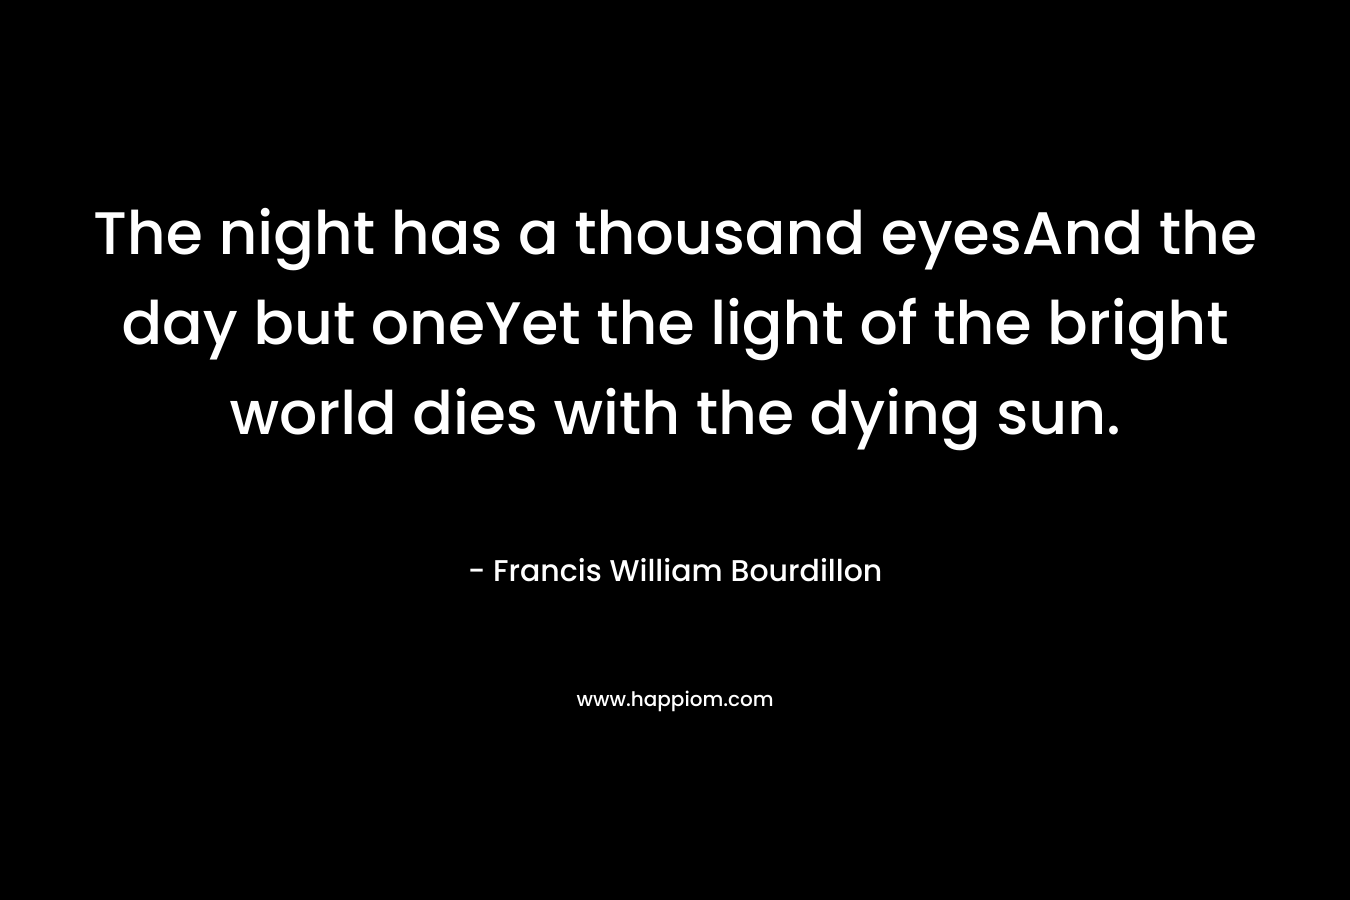 The night has a thousand eyesAnd the day but oneYet the light of the bright world dies with the dying sun.